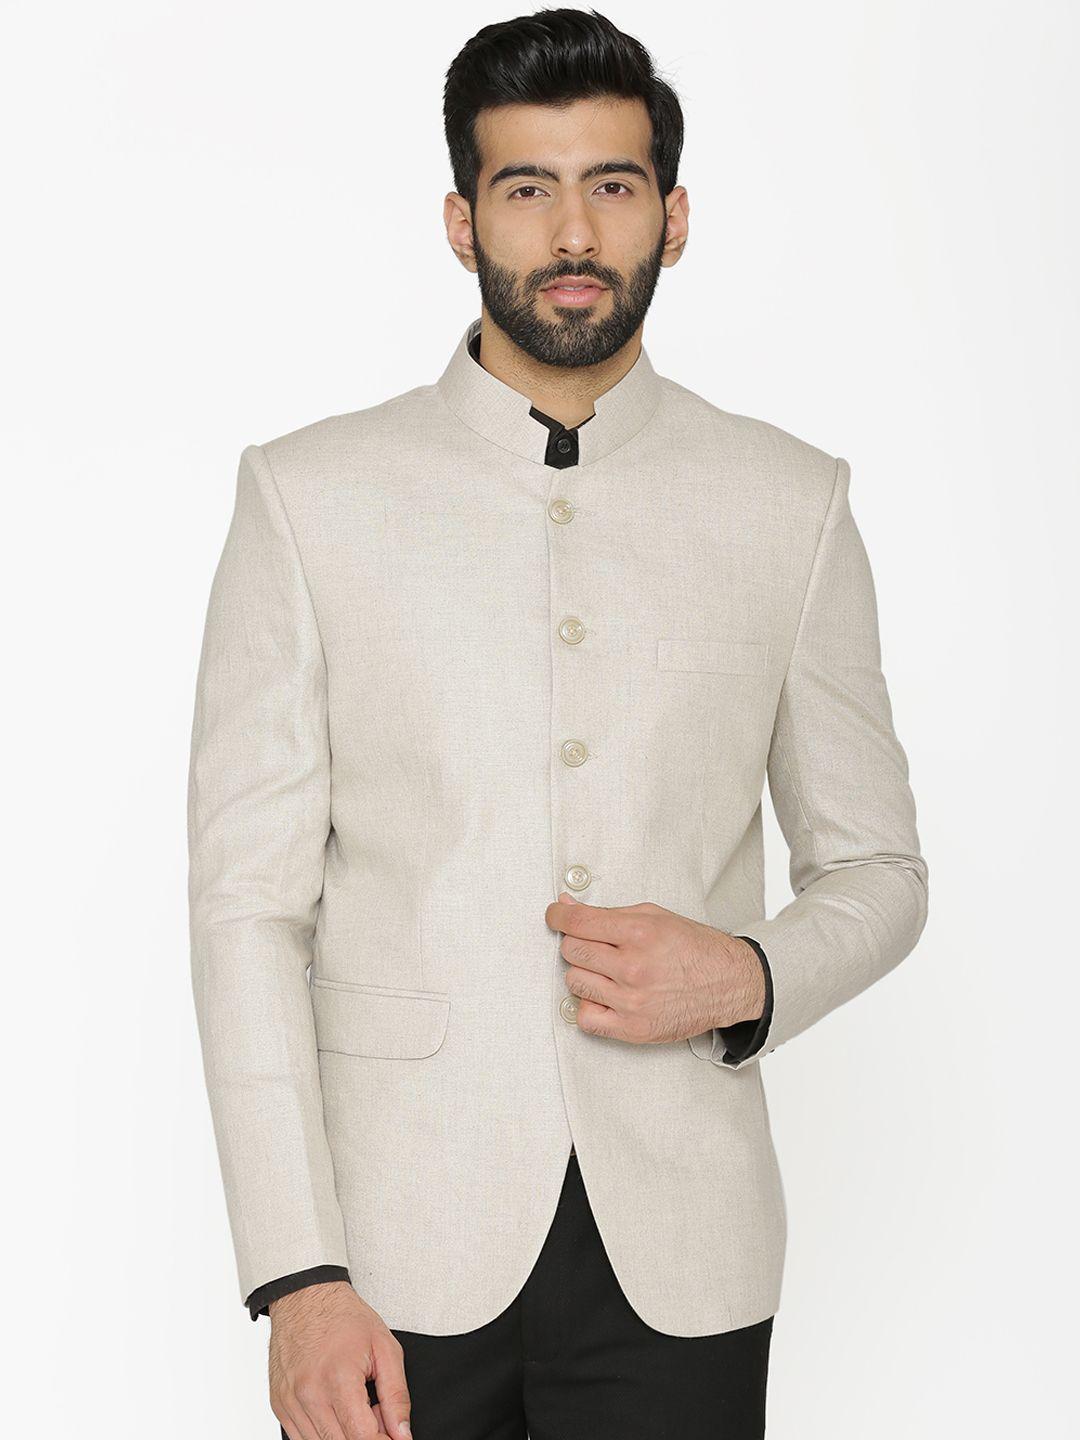 wintage-men-cream-coloured-solid-tailored-fit-linen-bandhgala-blazer